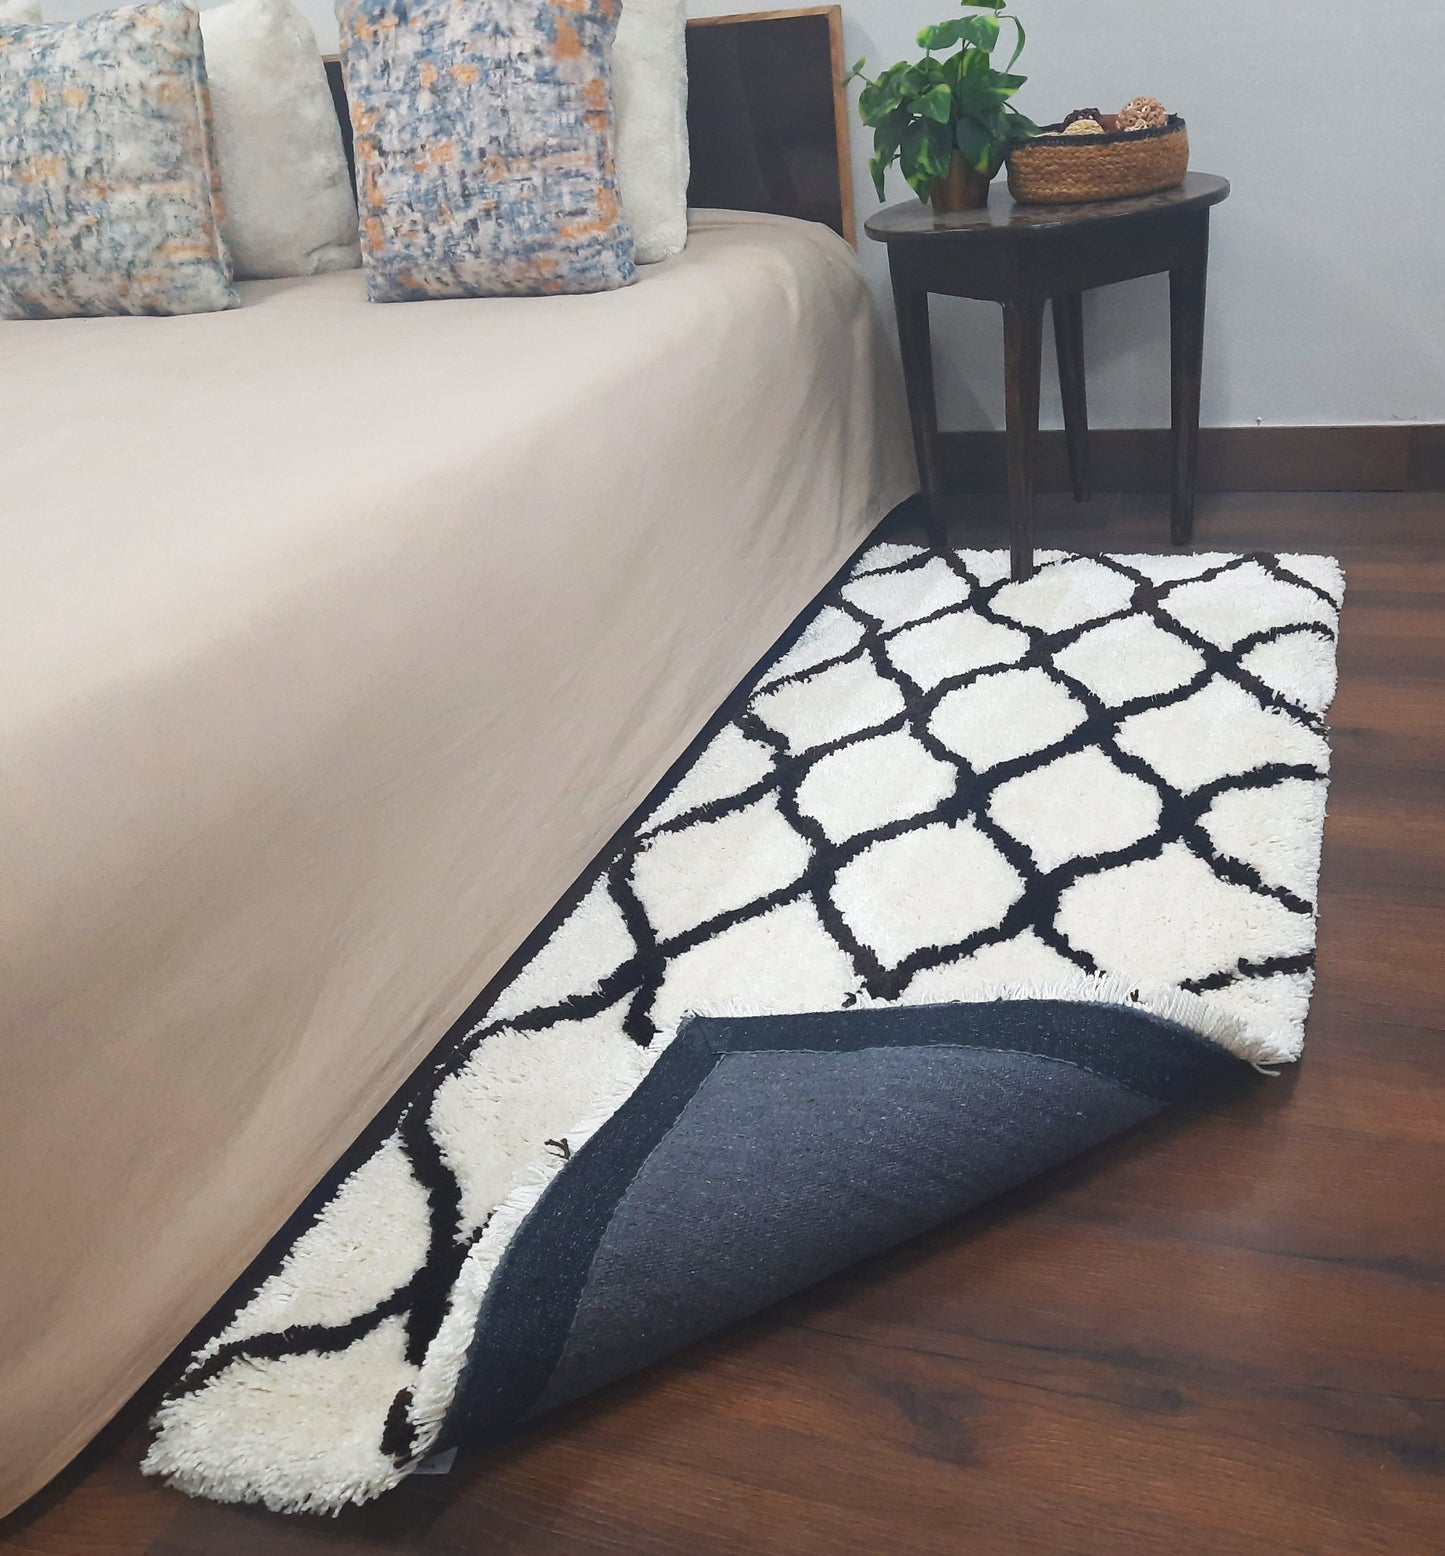 Plush Soft Washable Shaggy White Carpet With Black Moroccan Design /Bedside Runners by Avioni Home